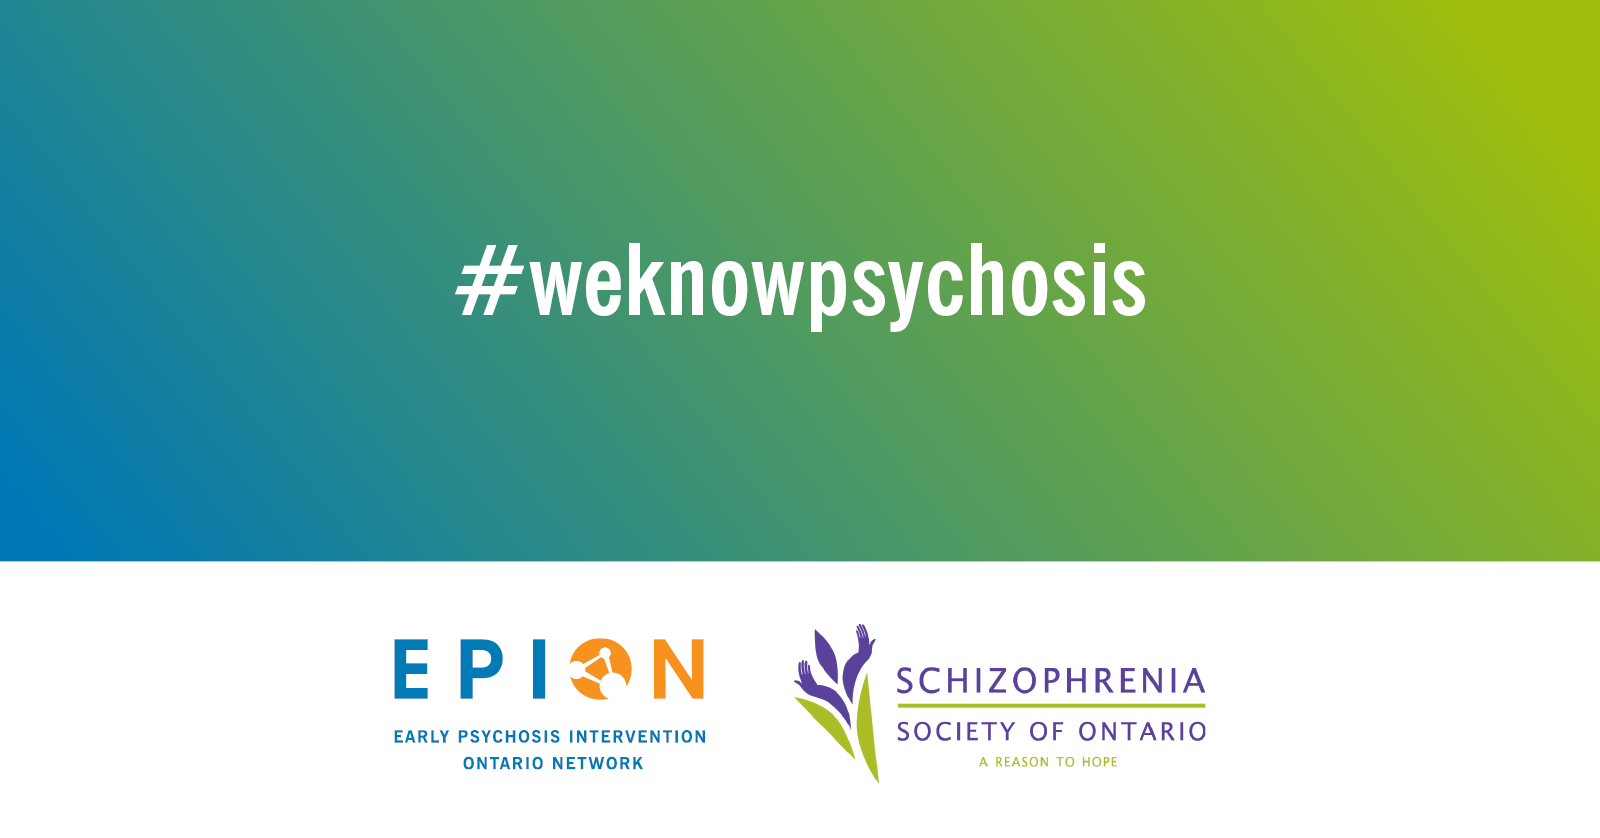 EPION + SSO partner on social media campaign educating about links between cannabis and psychosis. #weknowpsychosis